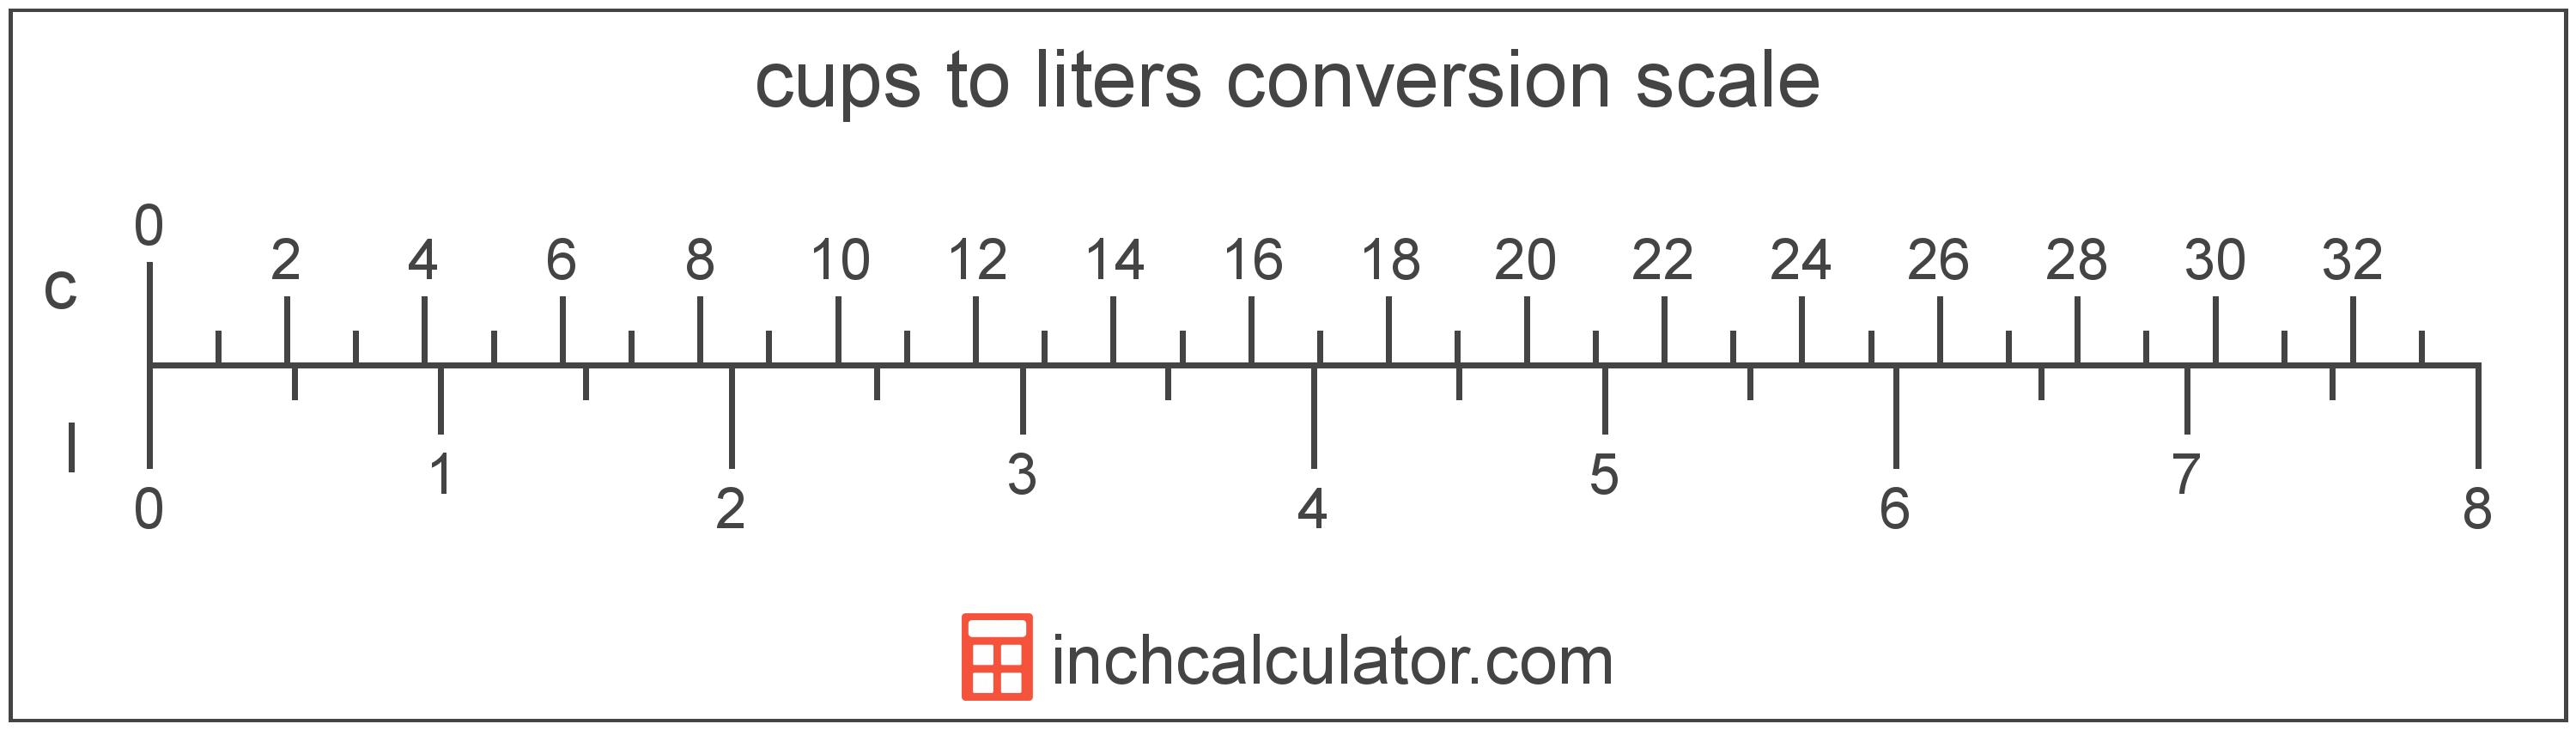 liters-to-cups-conversion-l-to-c-inch-calculator